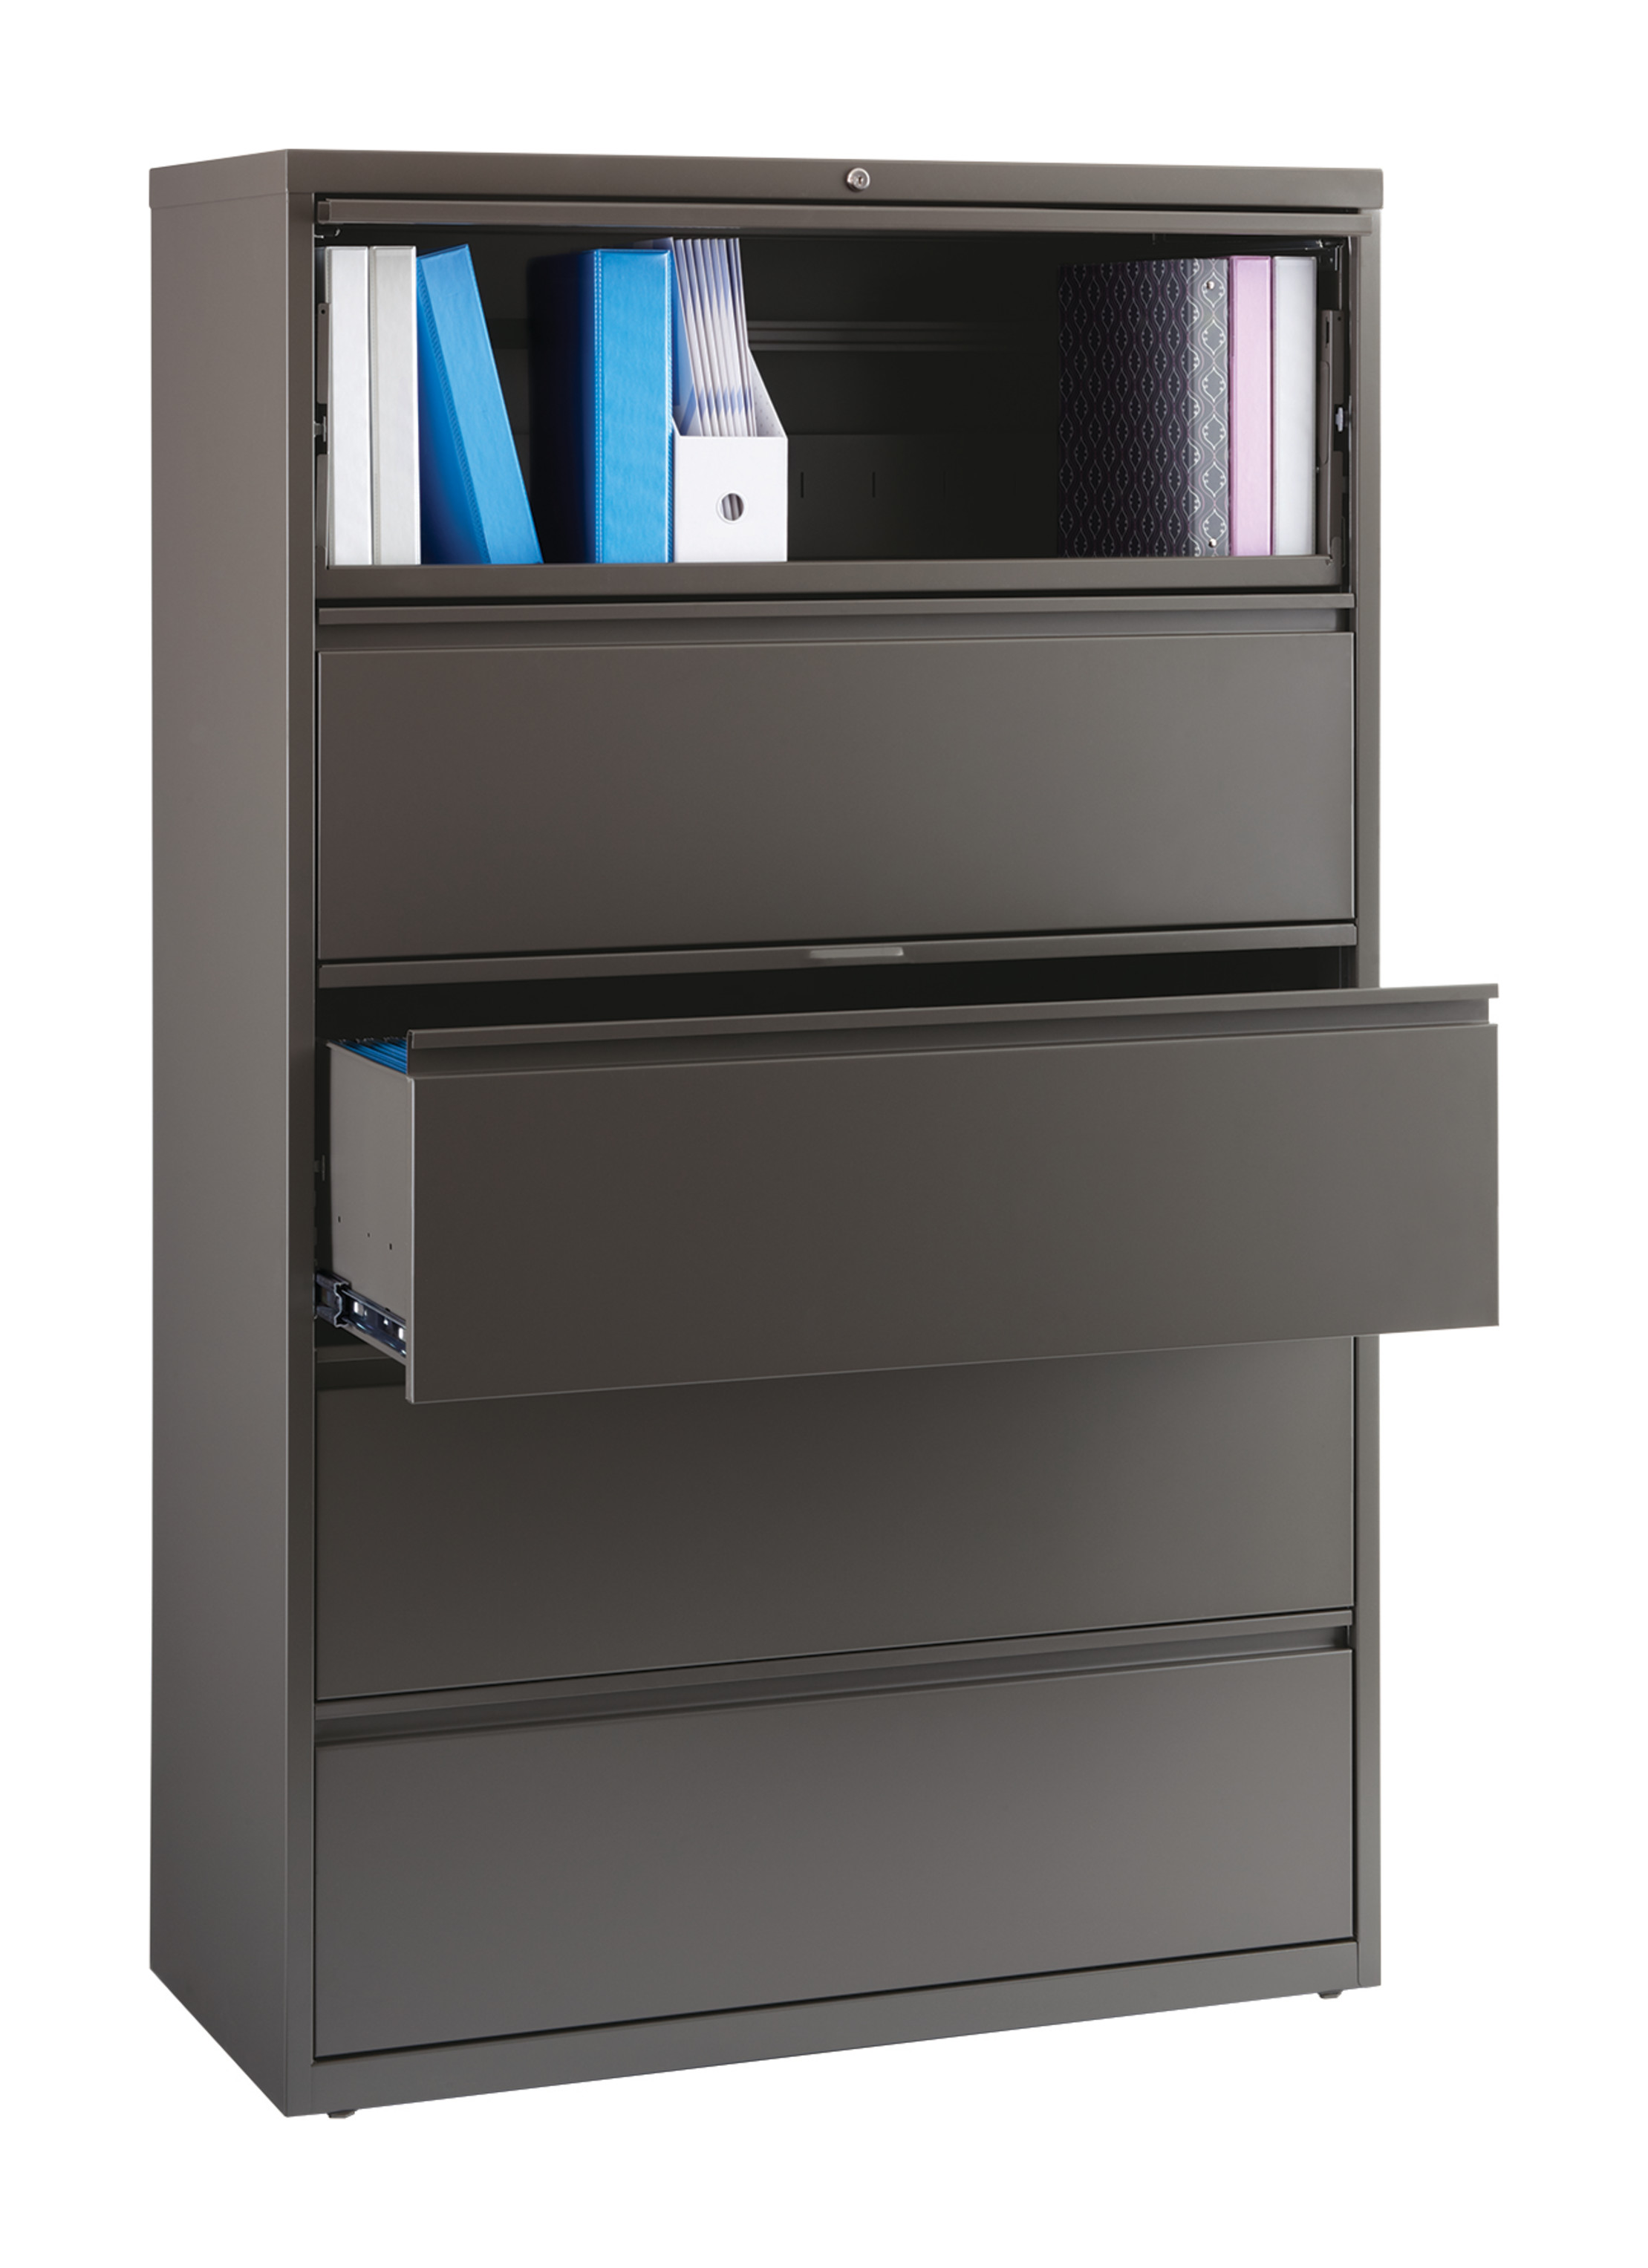 Hirsh 42 inch Wide 5 Drawer Metal Lateral File Cabinet for Home and Office, Holds Letter, Legal and A4 Hanging Folders, Medium Tone Brown - image 5 of 6